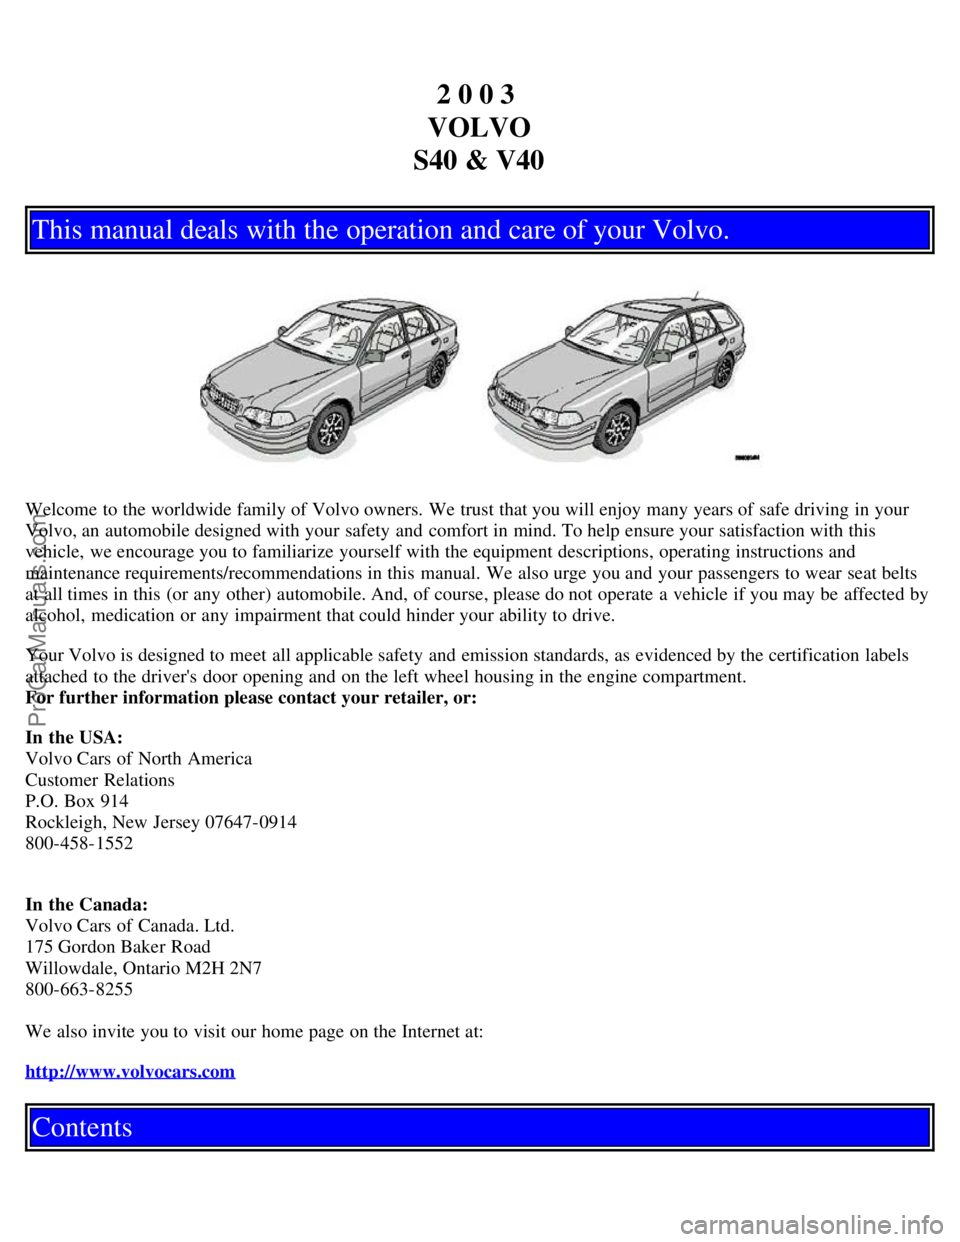 VOLVO S40 2003  Owners Manual 2 0 0 3 
VOLVO
S40 & V40
This manual deals with the operation and care of your Volvo.
Welcome to the worldwide family of Volvo owners. We trust that you will enjoy many years of safe driving in your
V